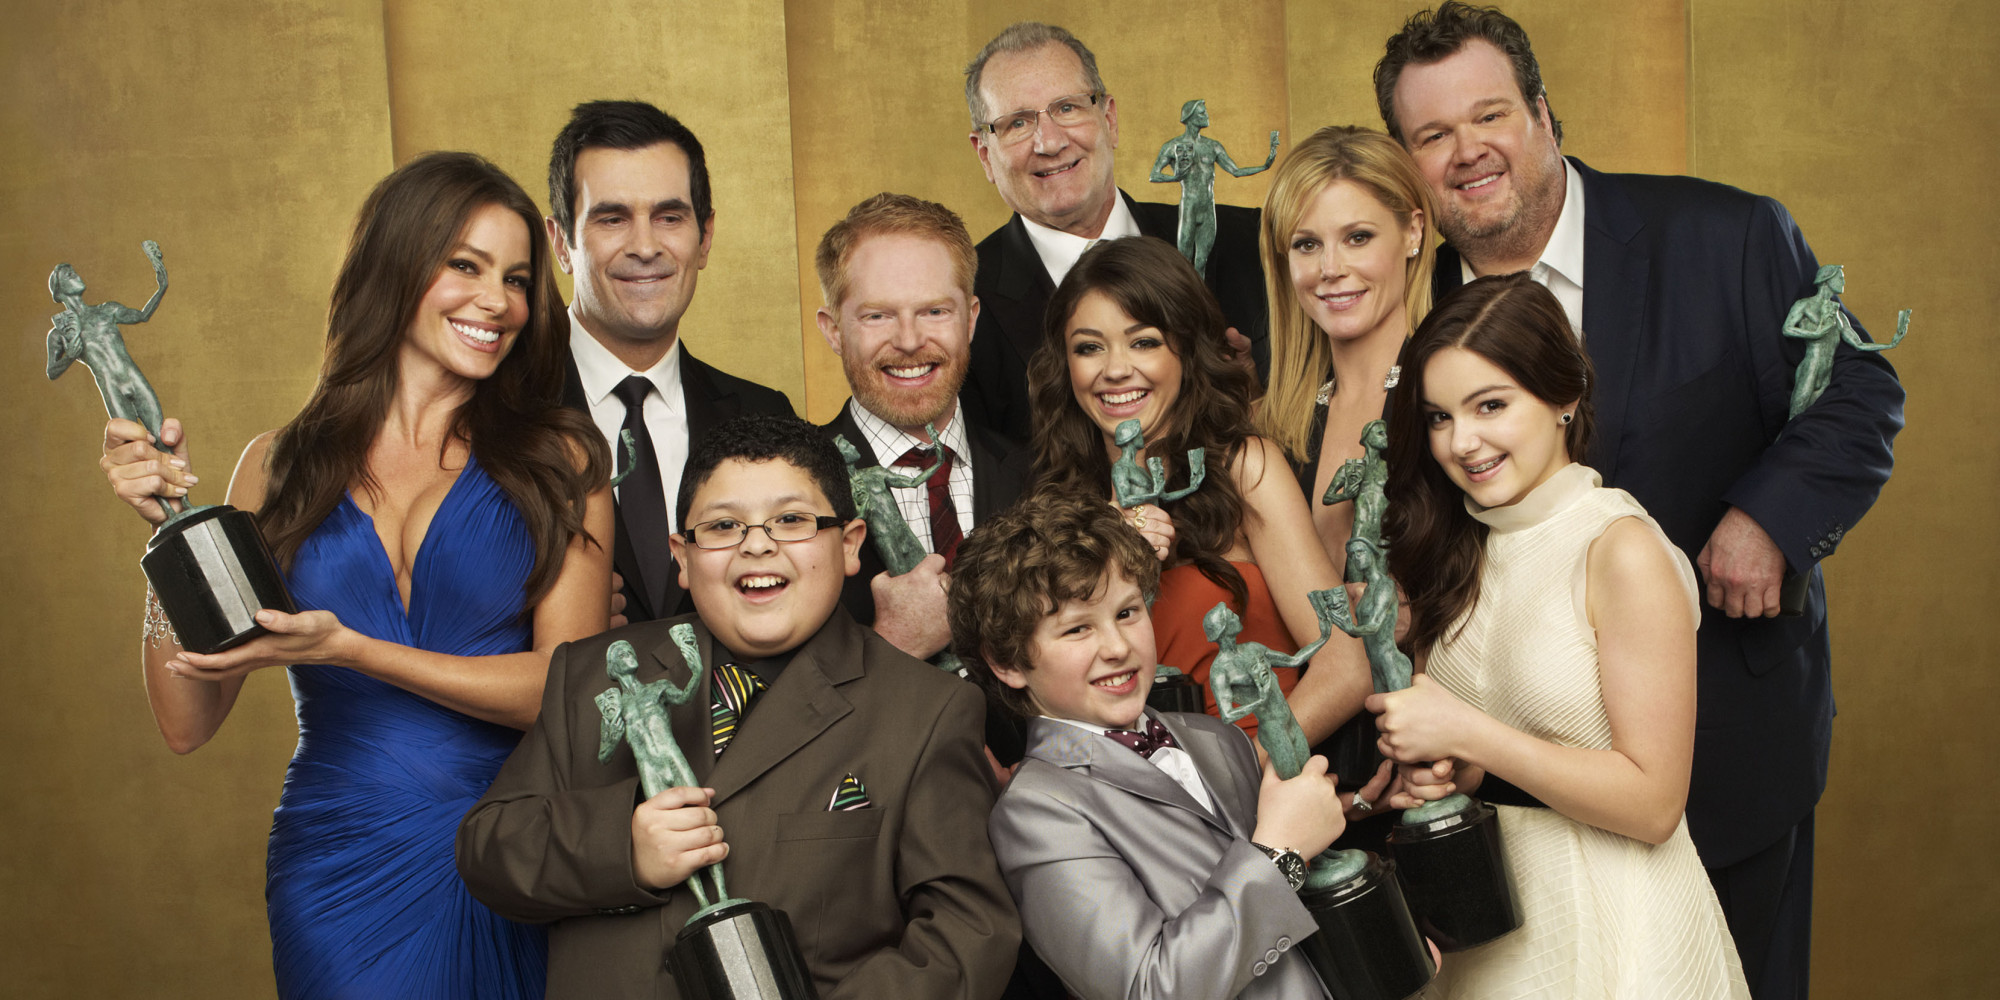 Nice Images Collection: Modern Family Desktop Wallpapers